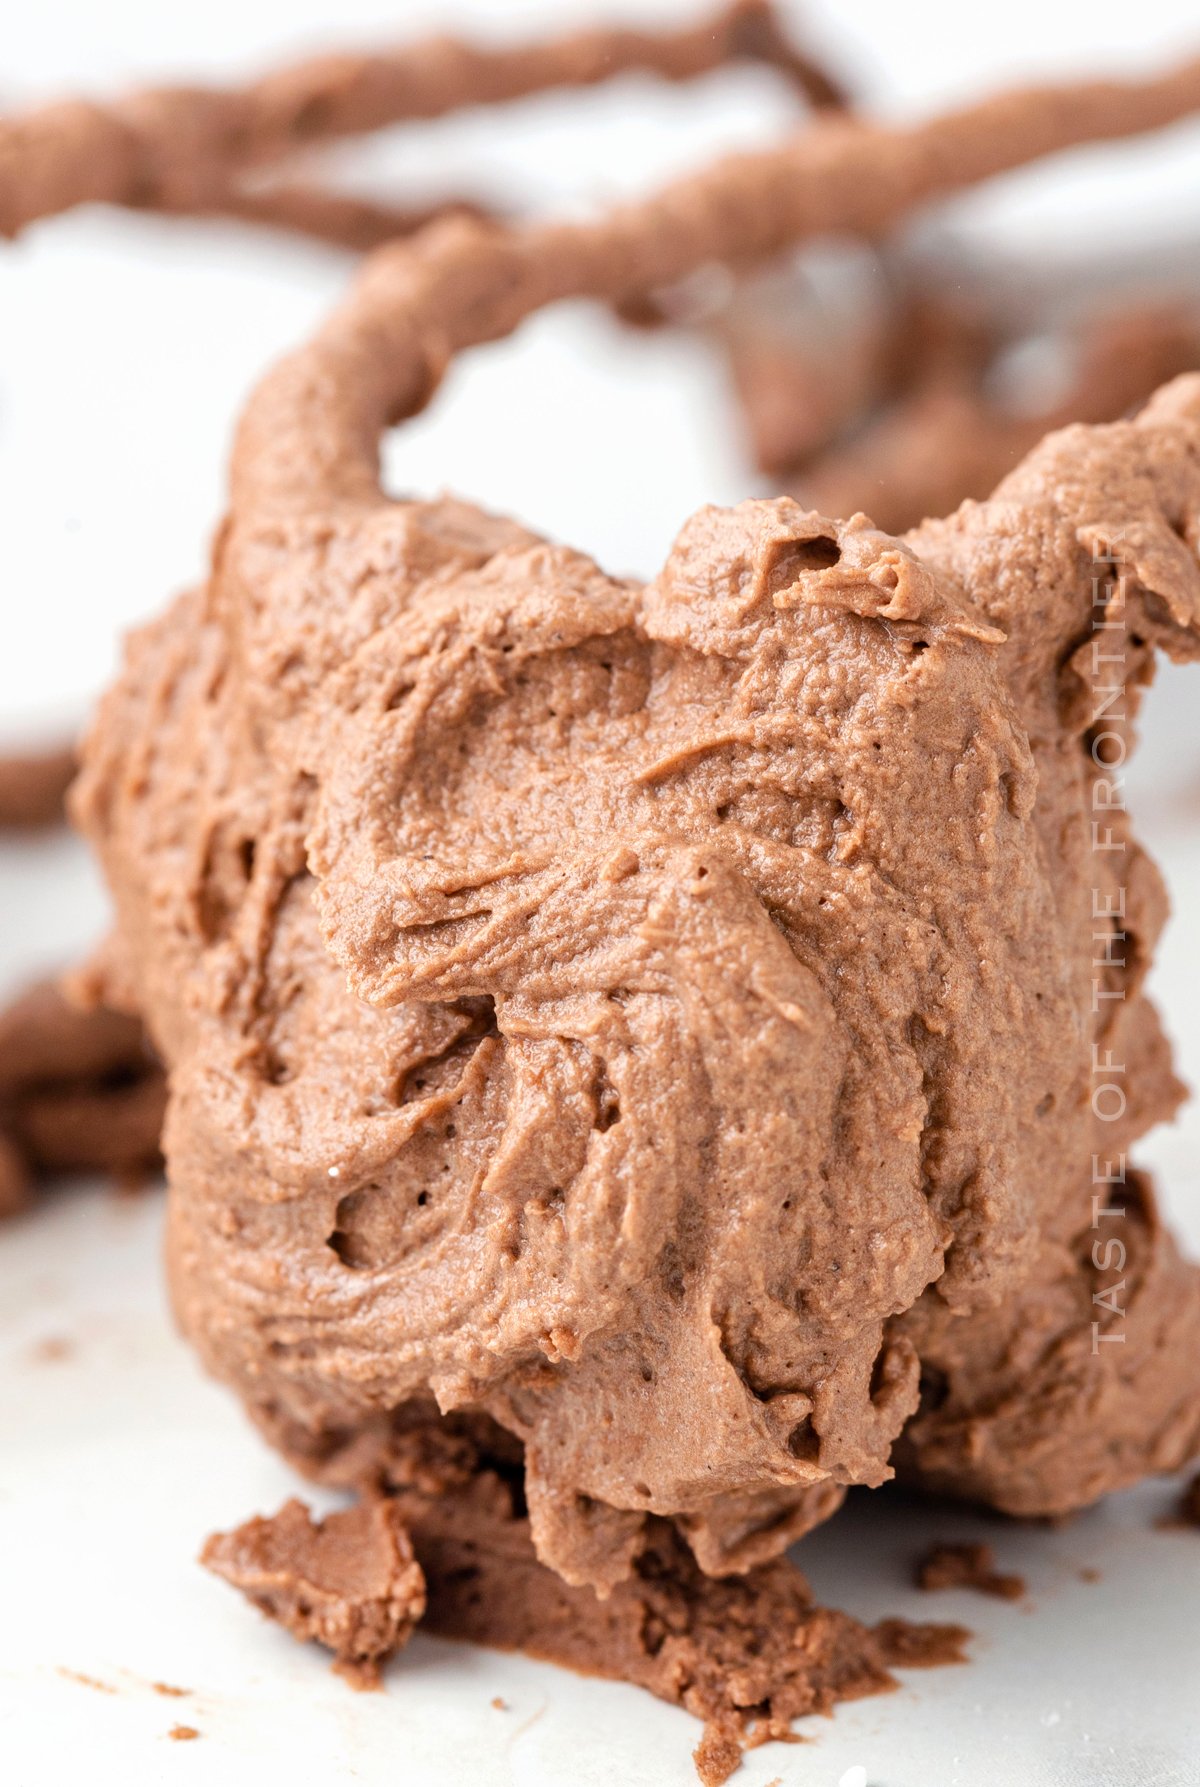 Creamy chocolate frosting